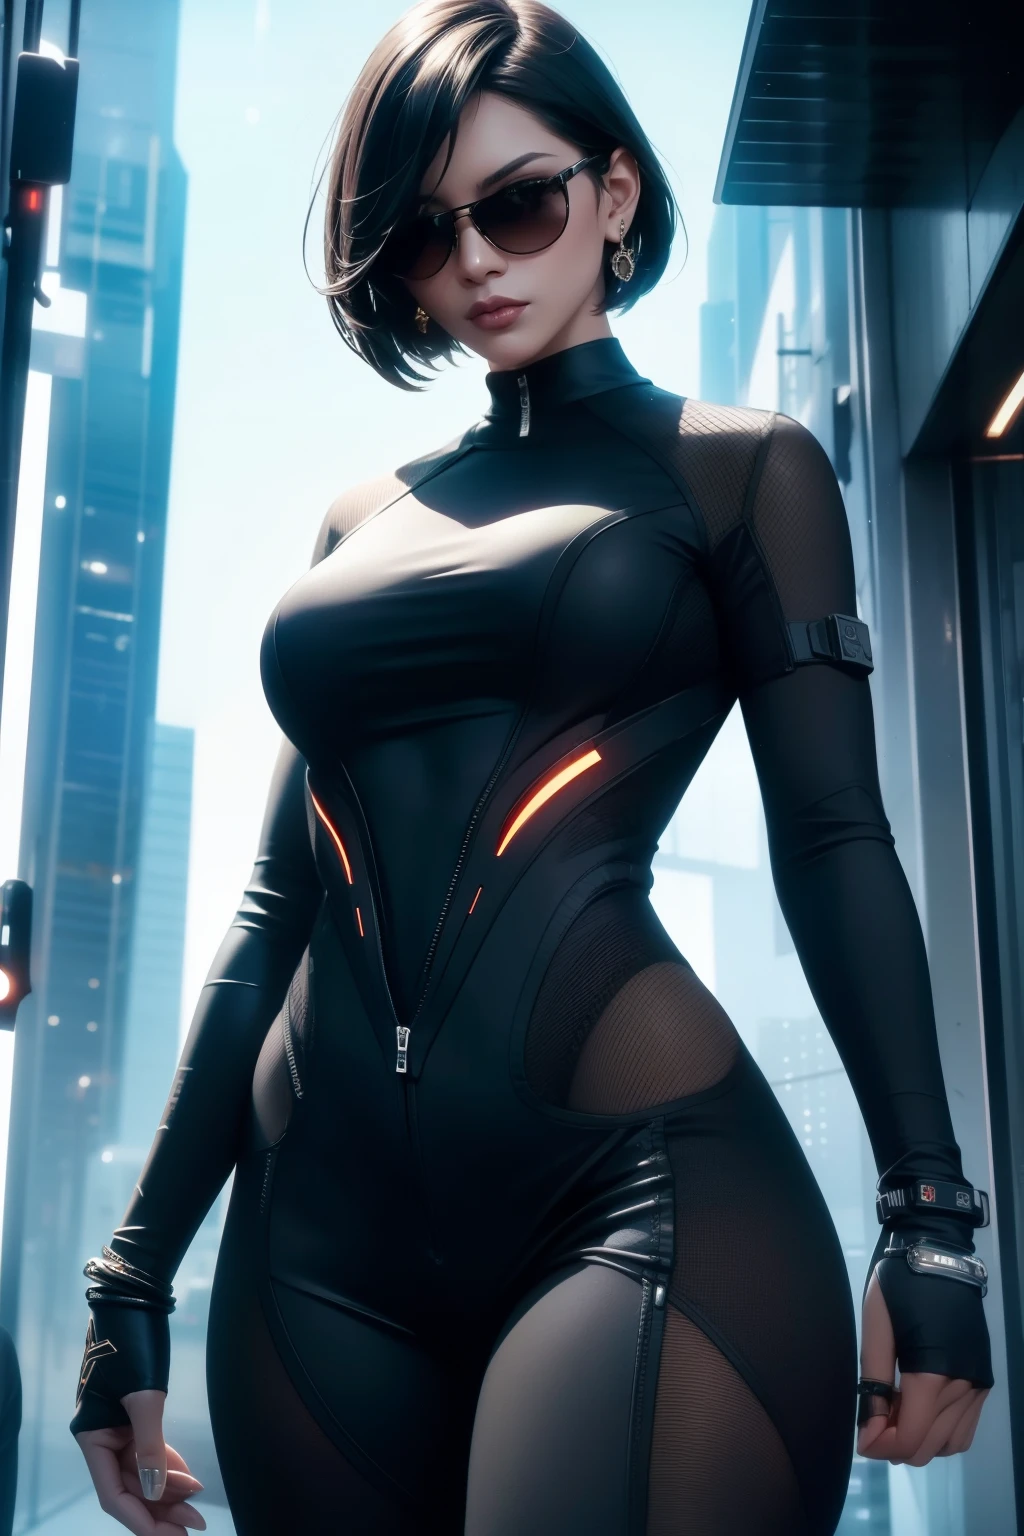 Waist up hot beauty woman (masterpiece) with bob short black hair, best quality, expressive eyes, perfect face, wearing a tight detailed ornad sci-fi cyberpunk combat plugsuit & sunglasses, sharp focus